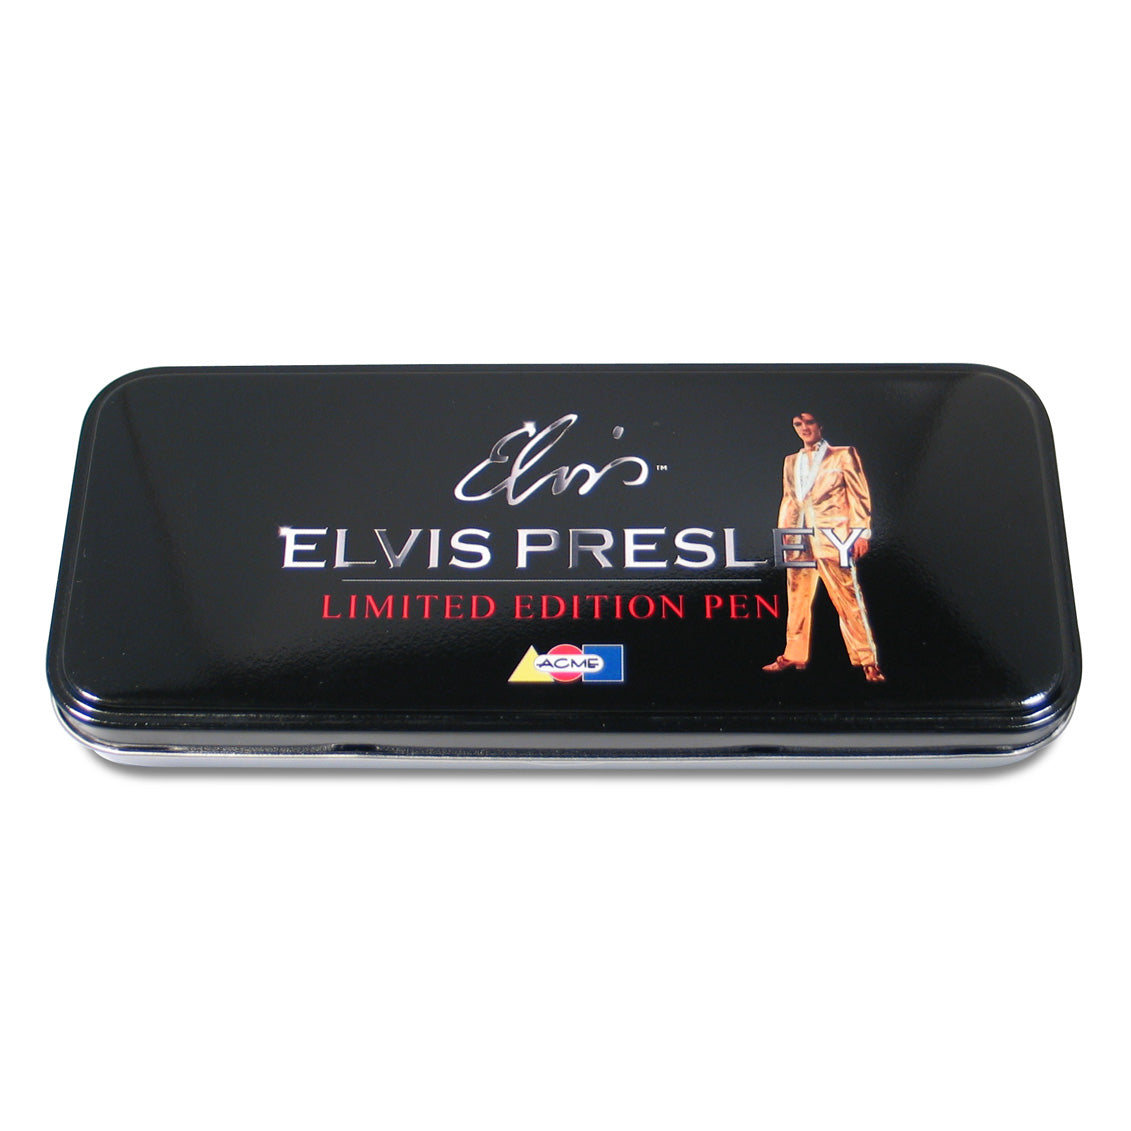 BLUE SUEDE SHOES Limited Edition Roller Ball Elvis Presley